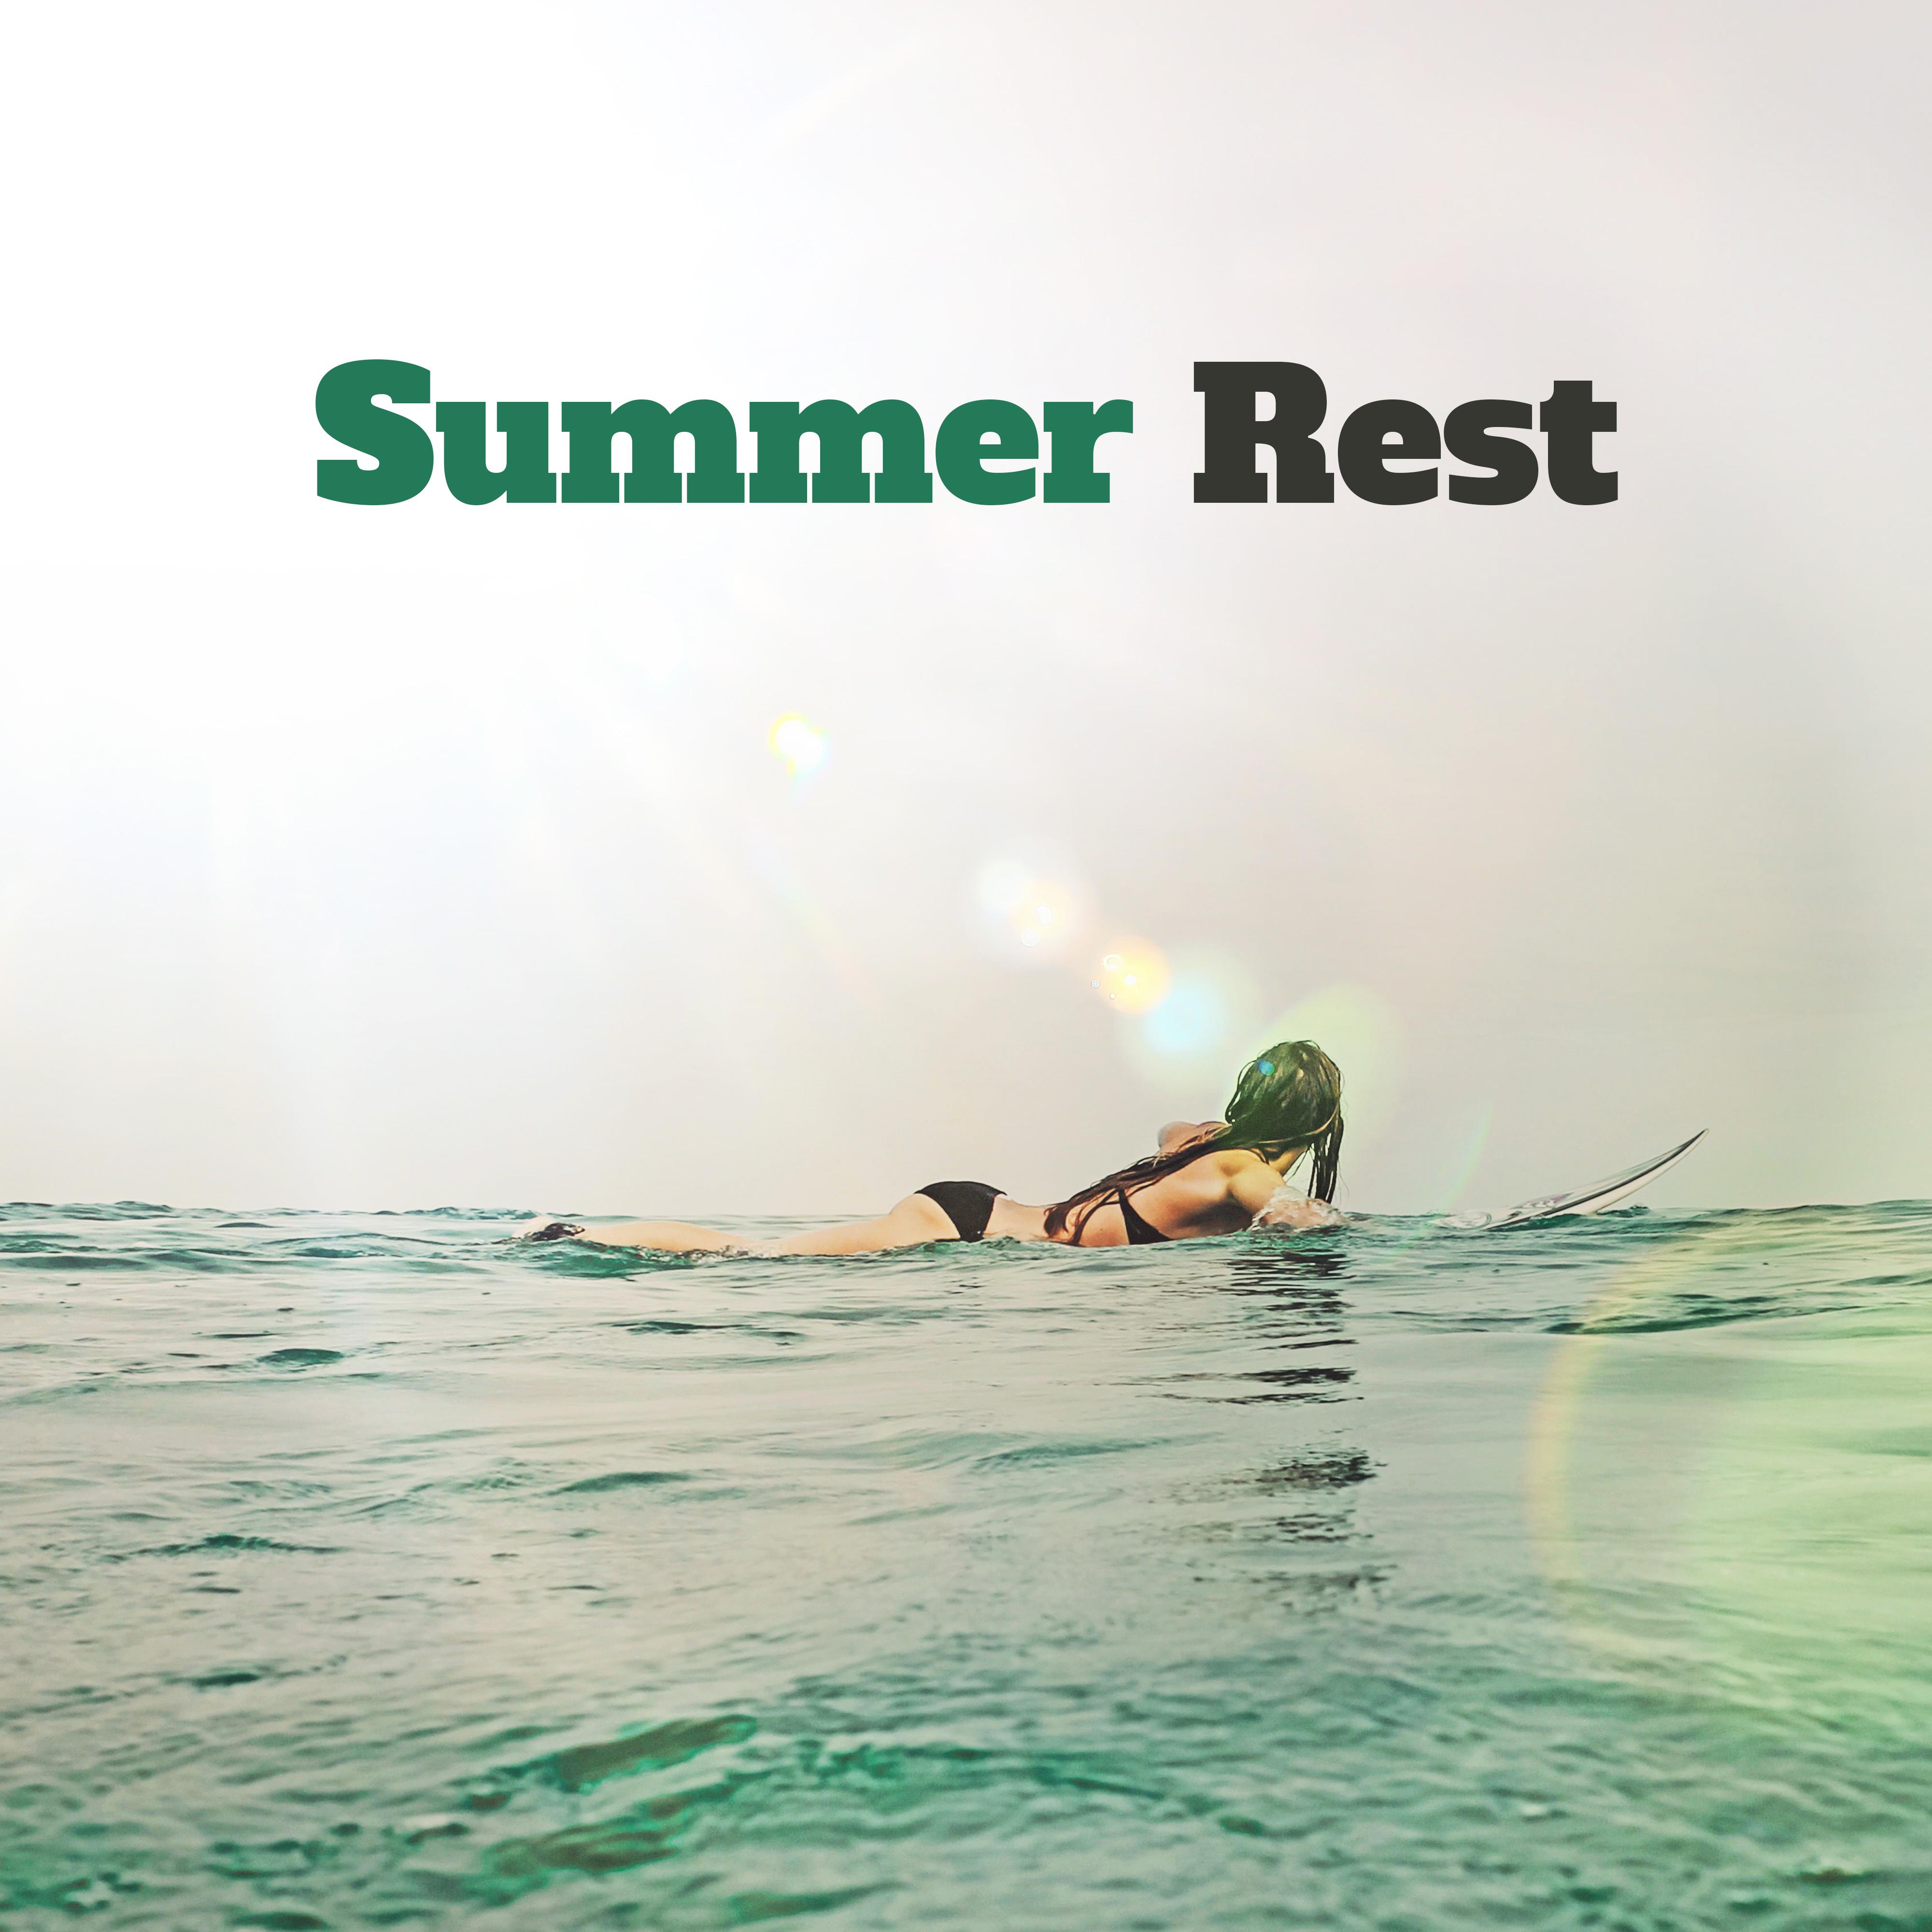 Summer Rest – Easy Listening, Summer Vibes to Relax, Holiday 2017, Stress Free